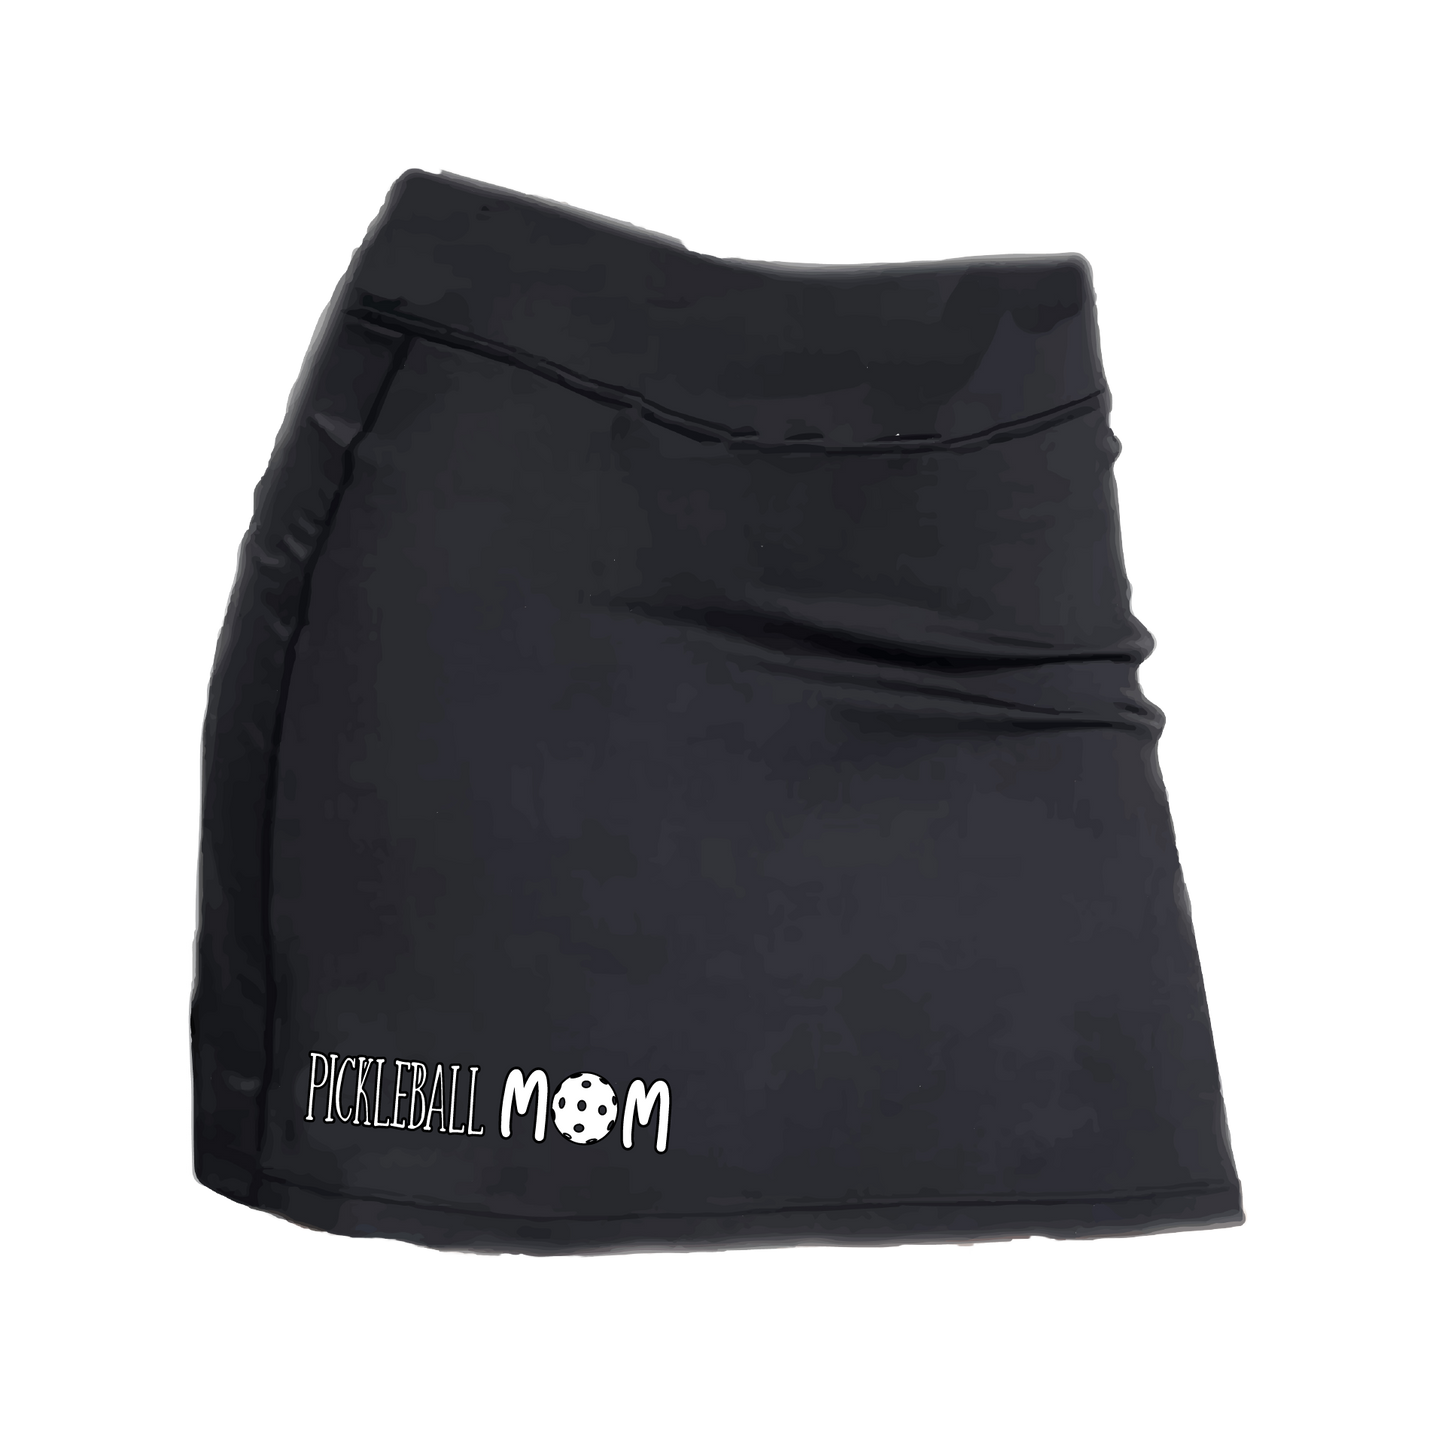 Pickleball Skort Design: Pickleball Mom  Women’s core active jersey-knit skort comes with built-in shorts made out of a poly-spandex blend that will keep your legs from rubbing together, without which often results in painful chafing. You can also feel secure knowing that no matter how strenuous the exercise, the skort will remain in place (it won’t ride up!). 